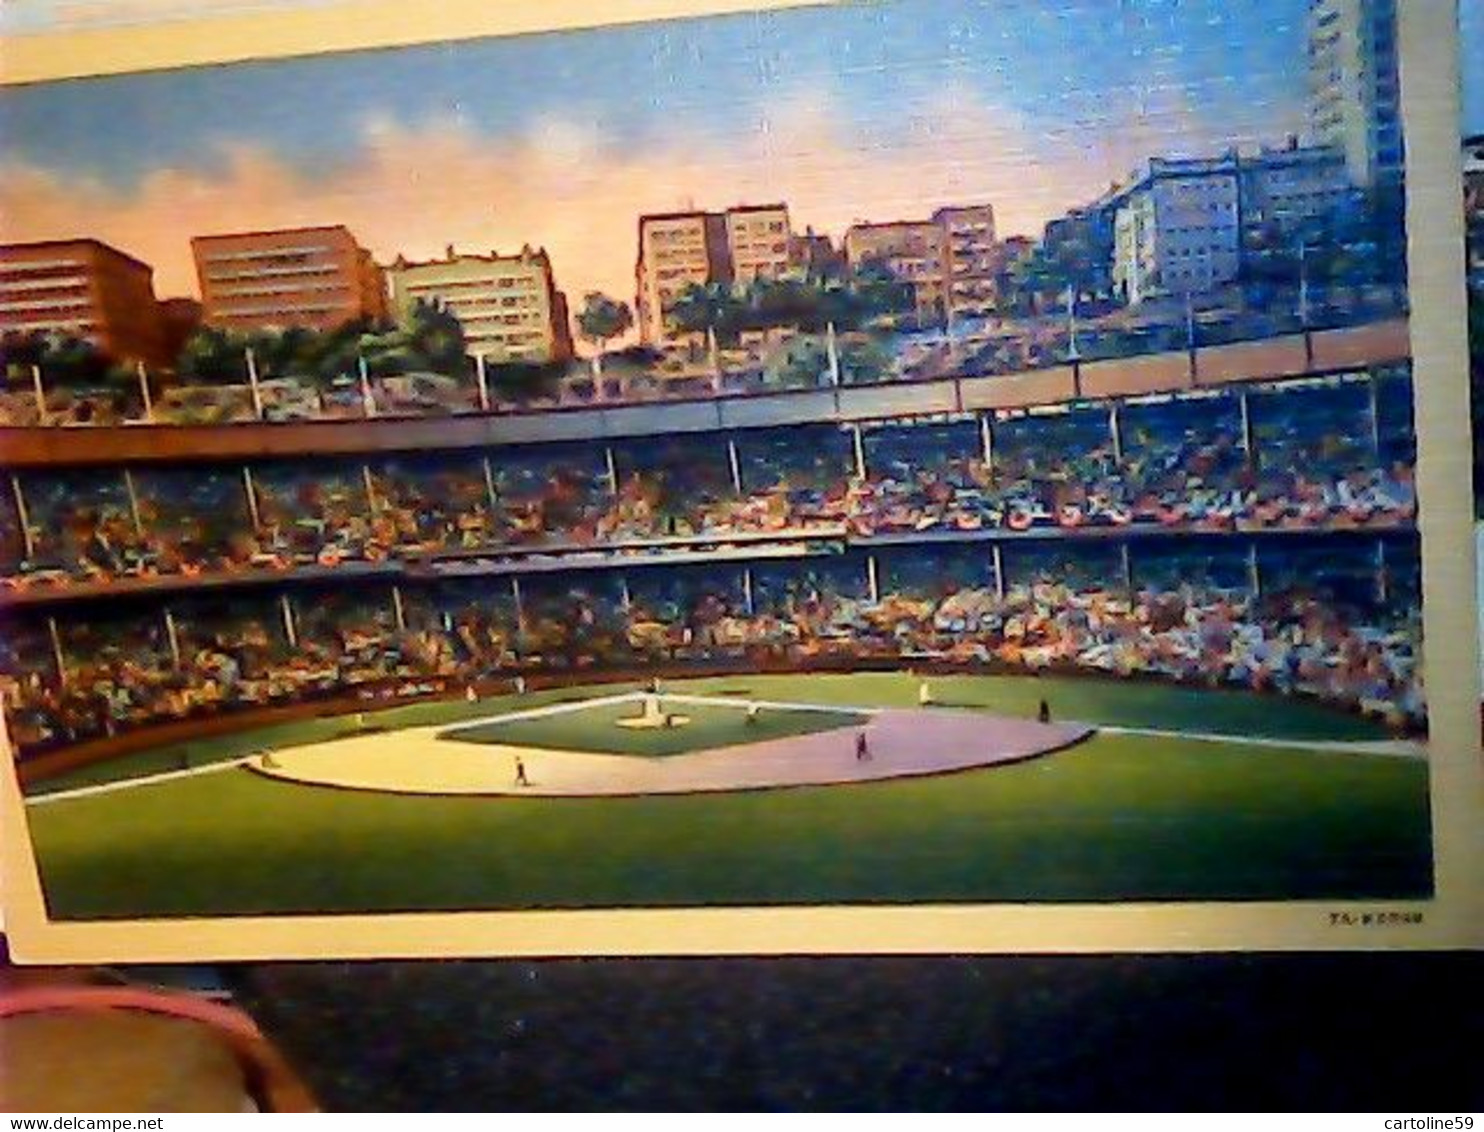 SPORTS BEISBOL BASEBALL NEW YORK STADE GIANTS POLO GROUNDS N1925 IG10057 - Stadiums & Sporting Infrastructures